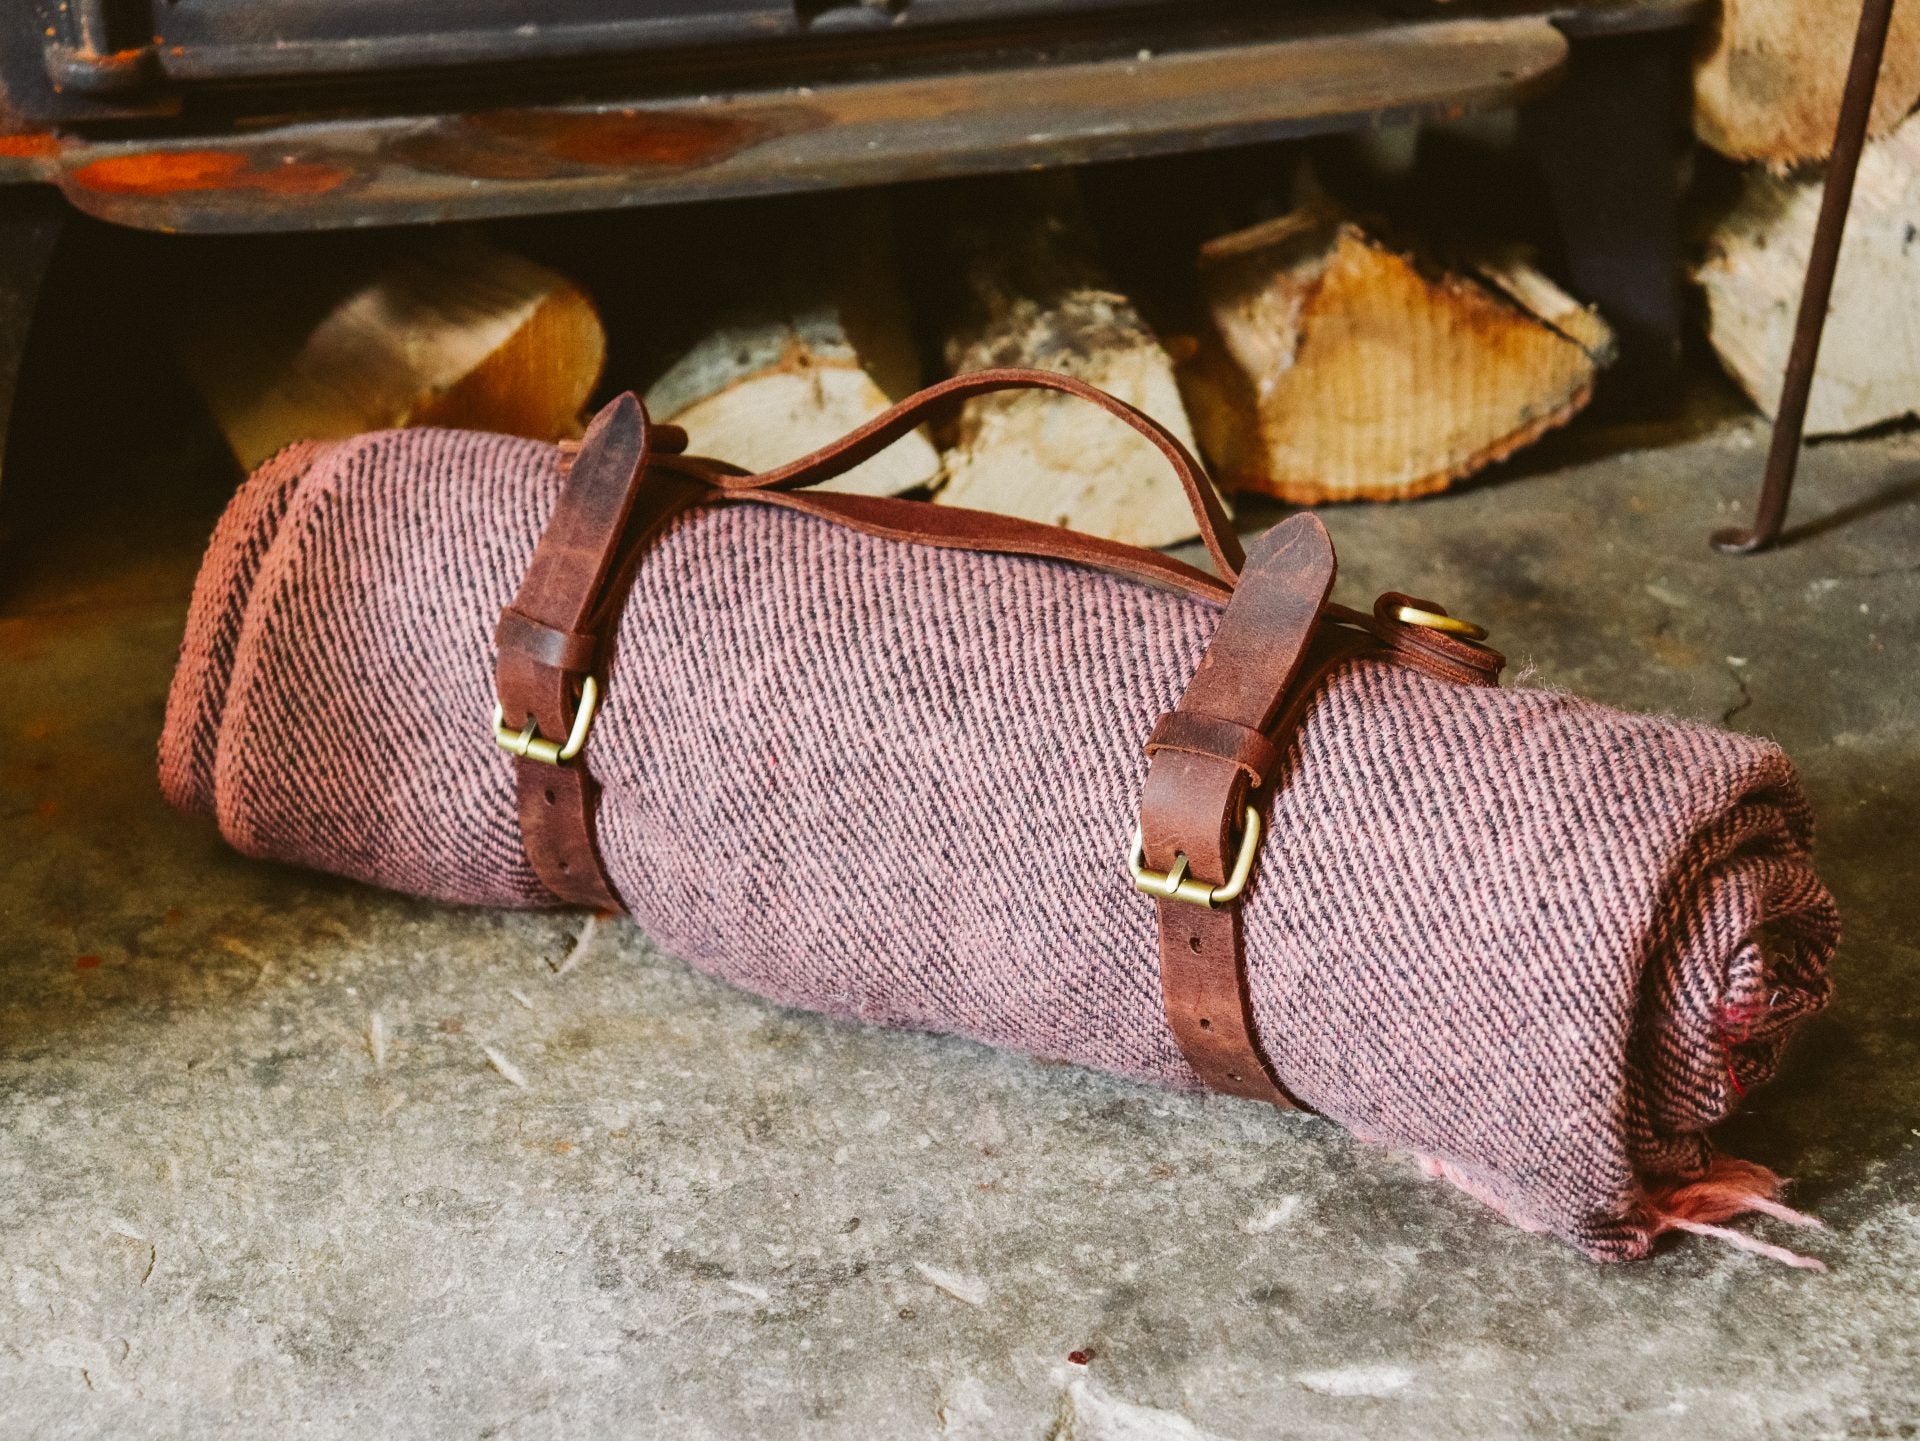 The perfect gift, our new accessories for 2021 will be perfect for Christmas. Our new leather yoga mat | blanket carrier is a unique gift gym and picnic lovers will adore 